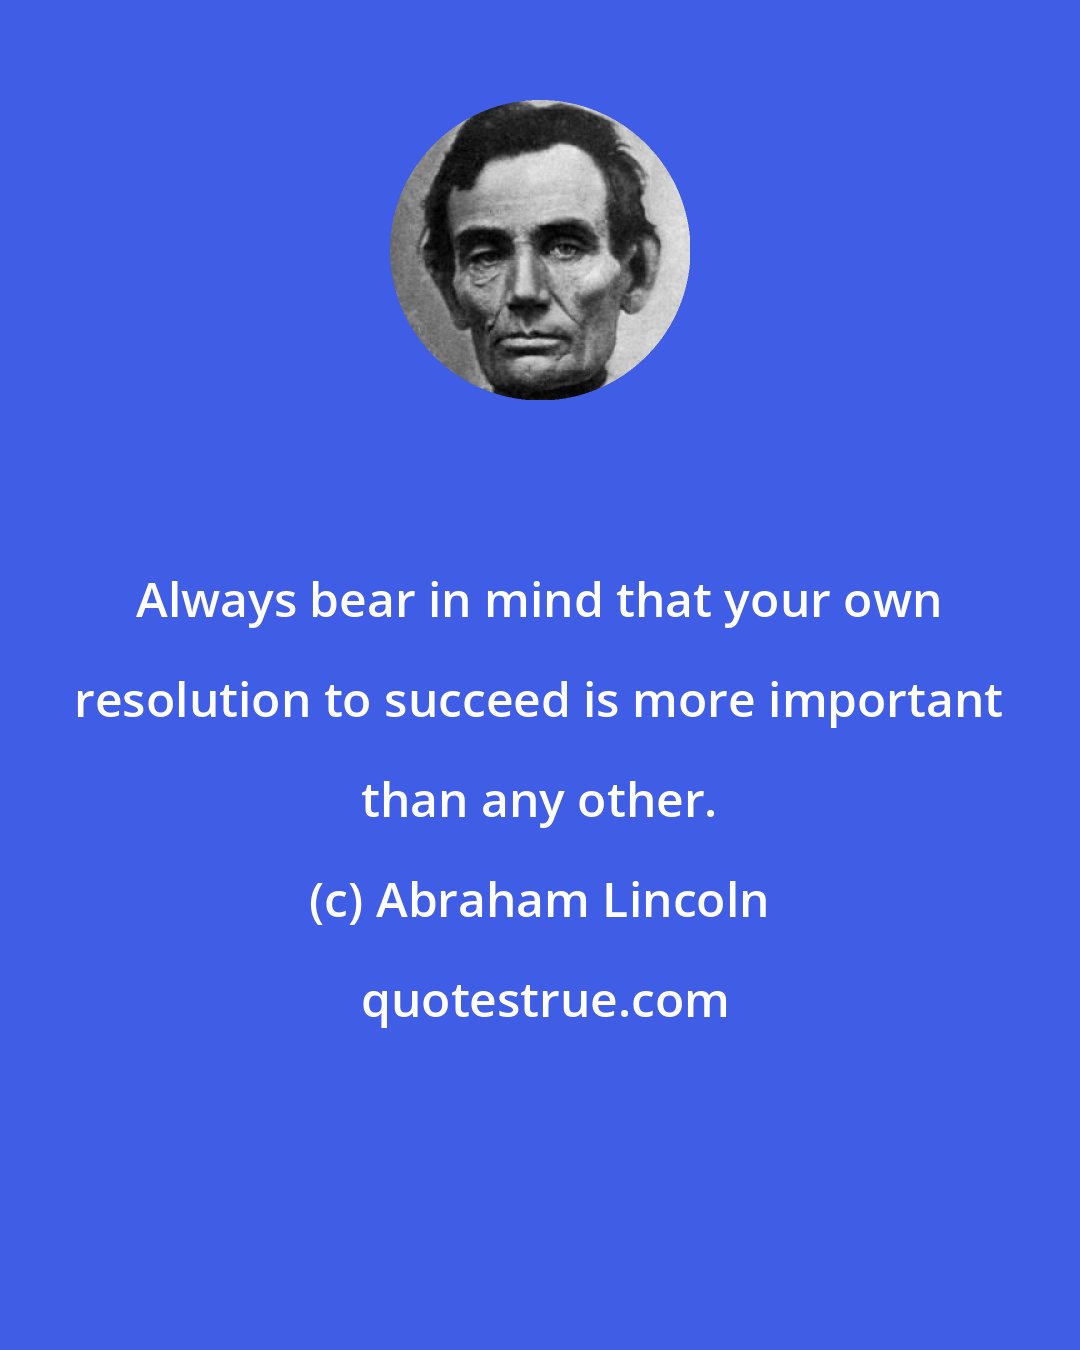 Abraham Lincoln: Always bear in mind that your own resolution to succeed is more important than any other.